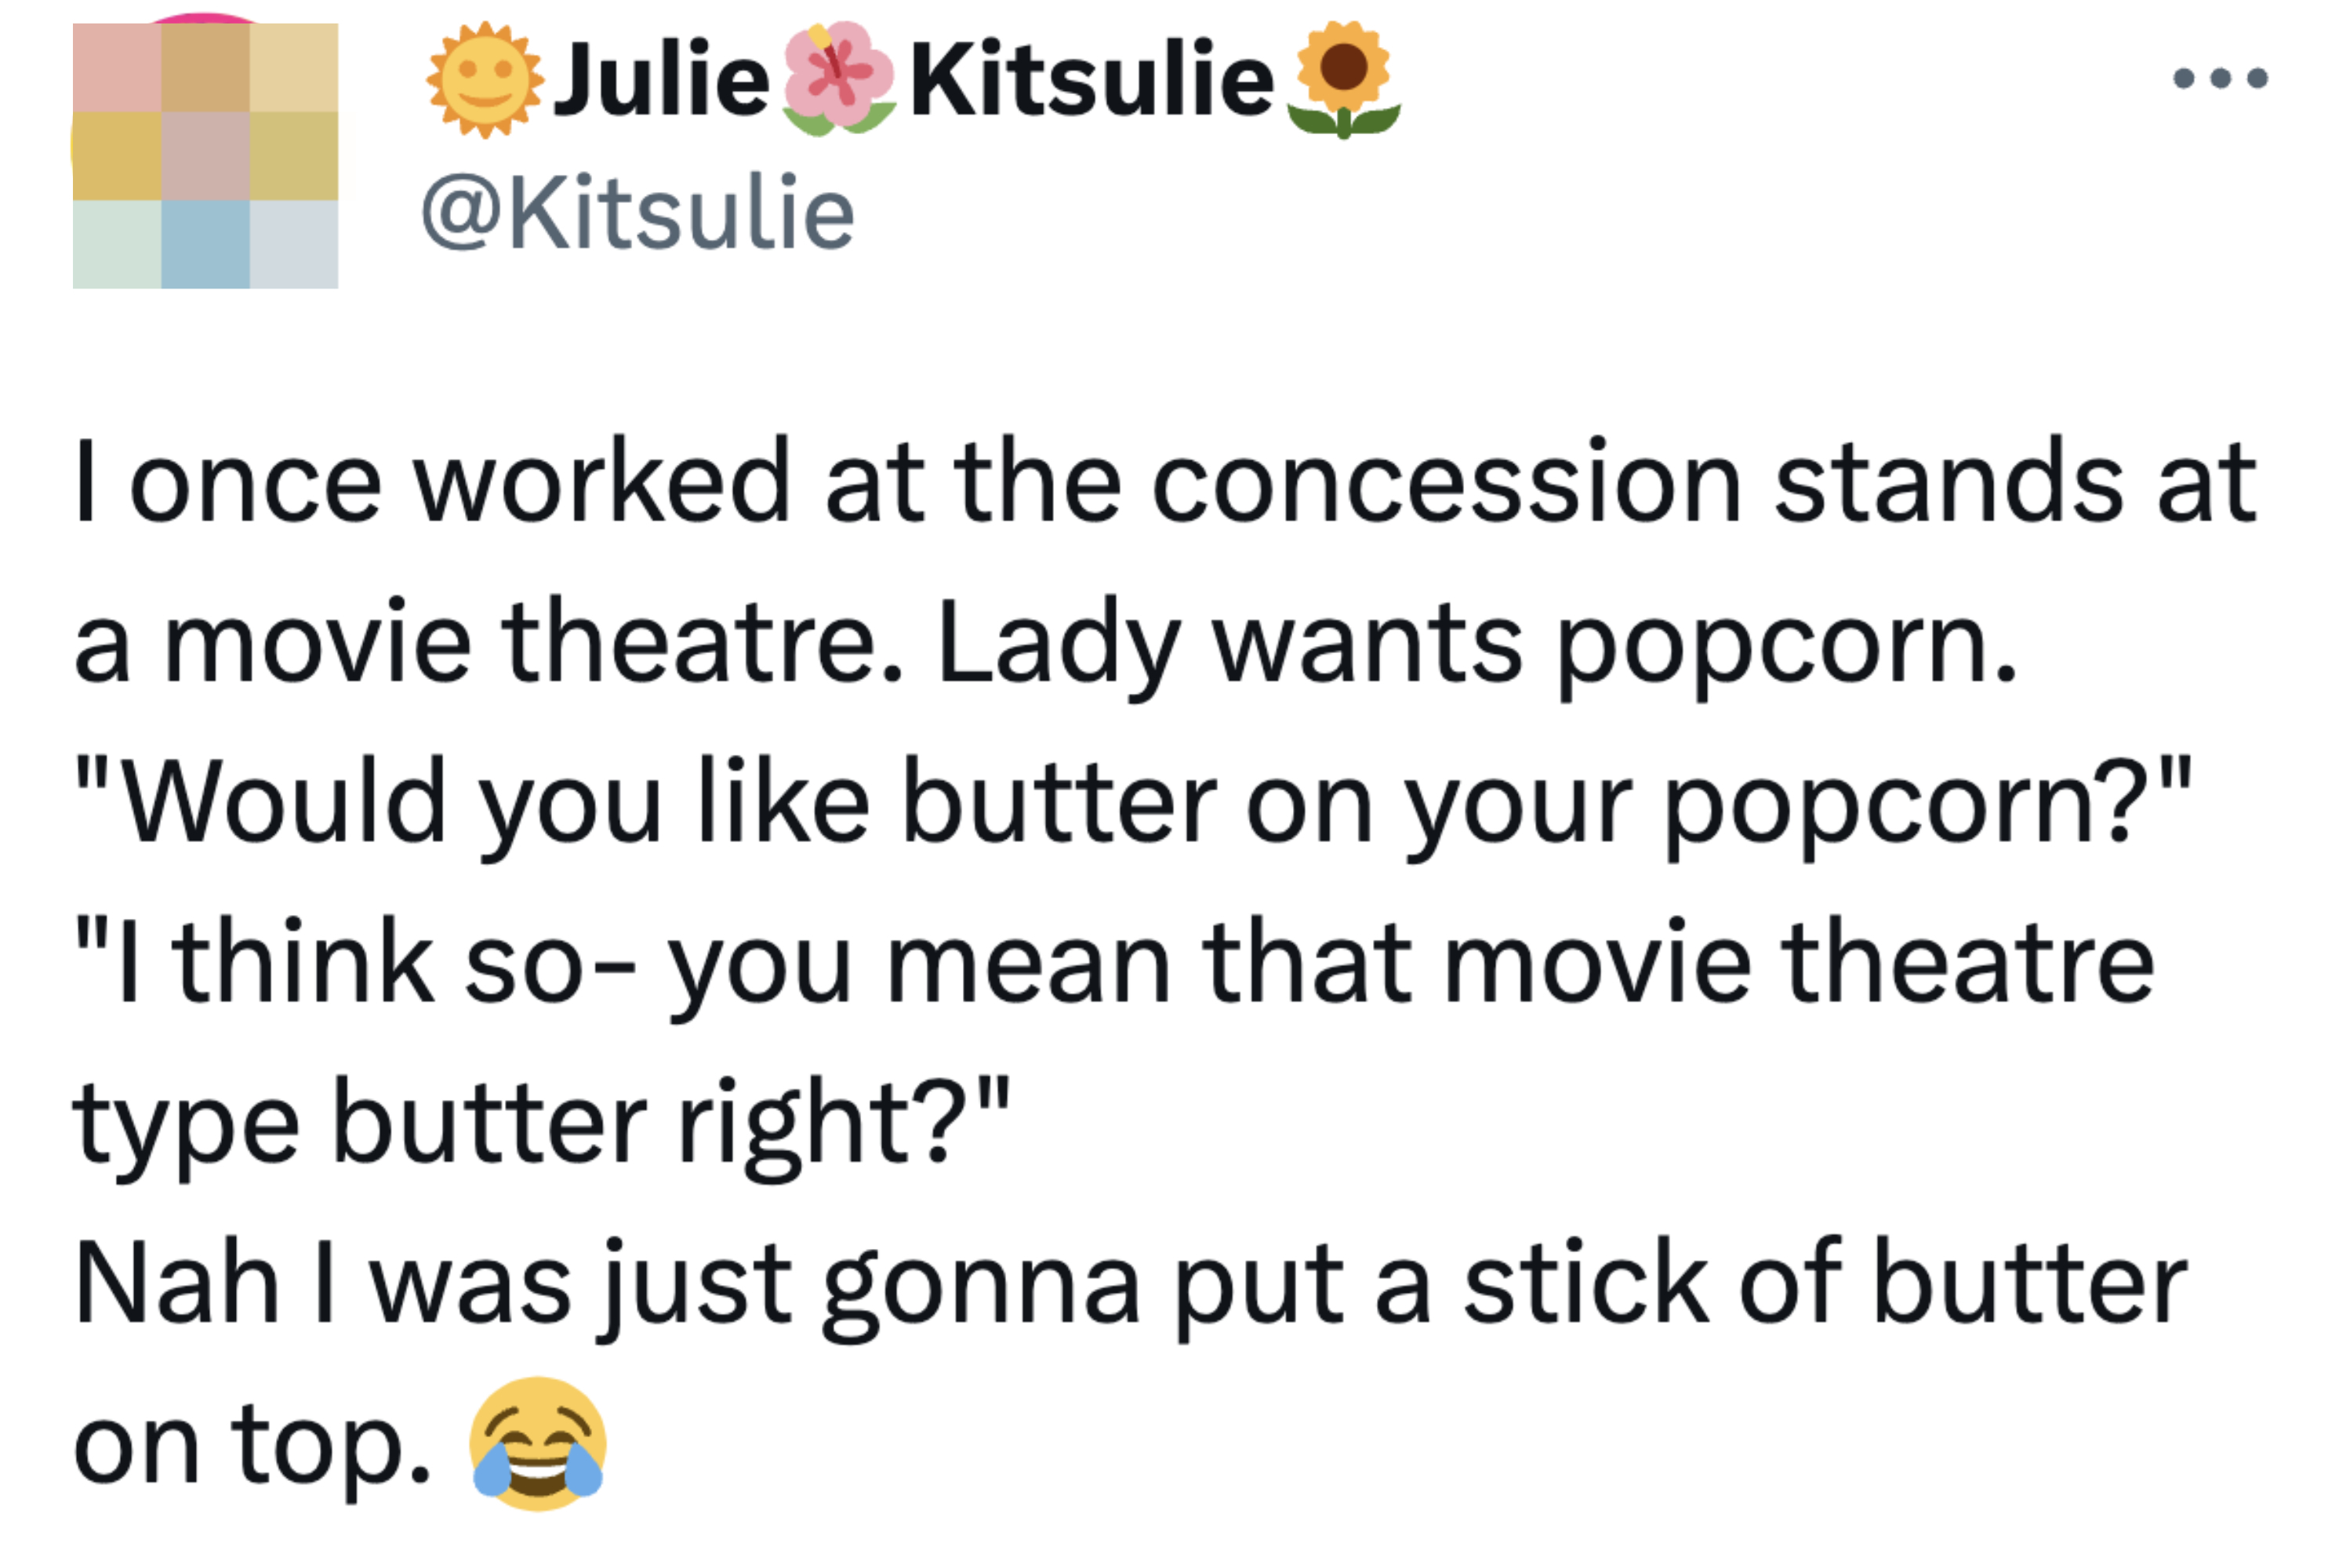 &quot;Nah I was just gonna put a stick of butter on top.&quot;